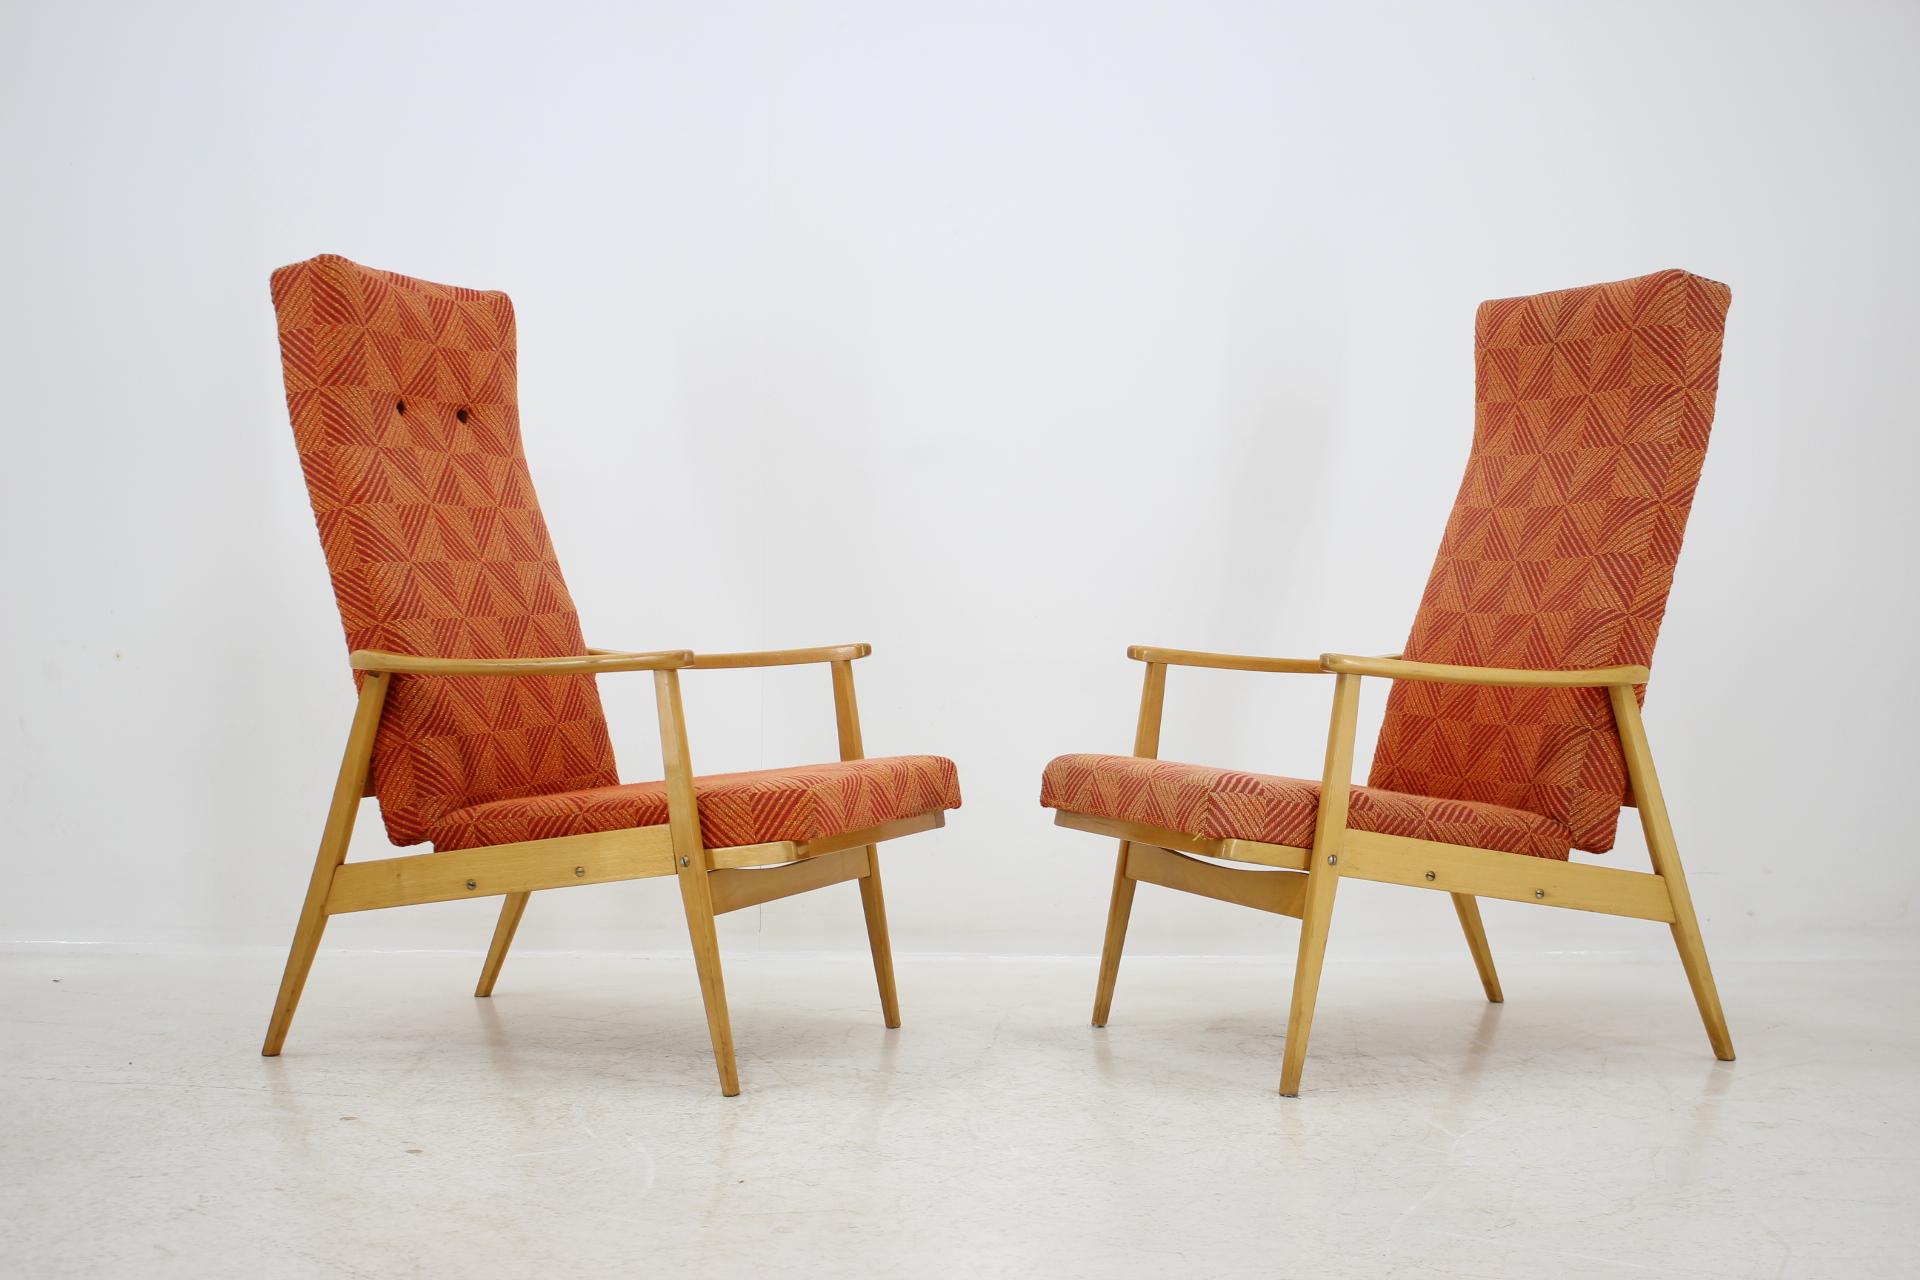 - Made in Czechoslovakia
- Made of beech, fabrik
- Wooden parts is in original condition
- Suitable for upholstery renovation
- Armchairs have six positions
- Dimension of footstools: H 37 x W 52 x D 43
- Good, original condition.